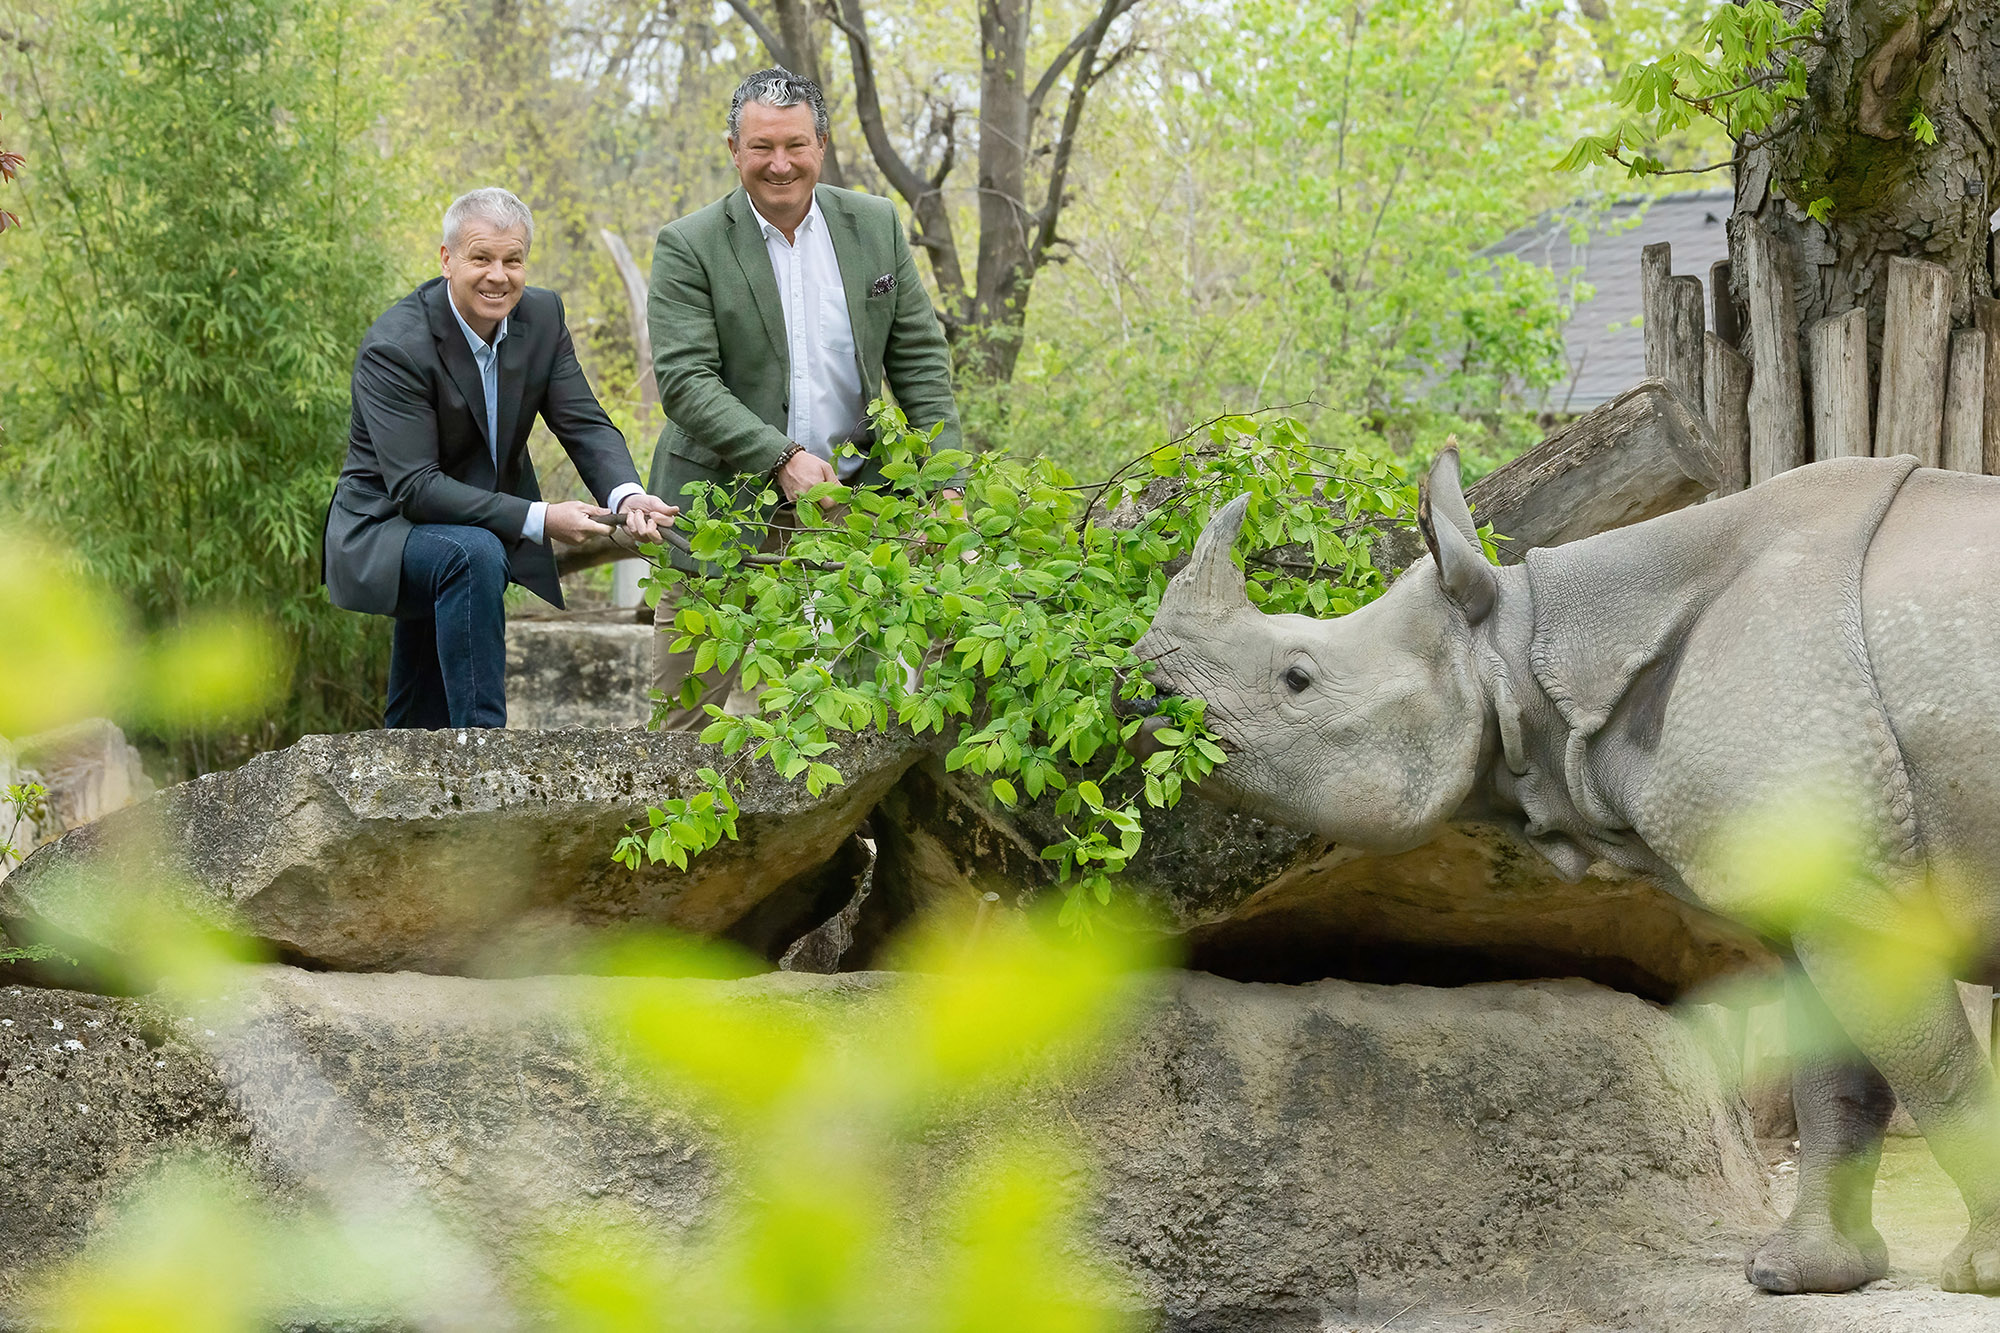  Endangered Indian Rhinos From World’s Oldest Zoo…